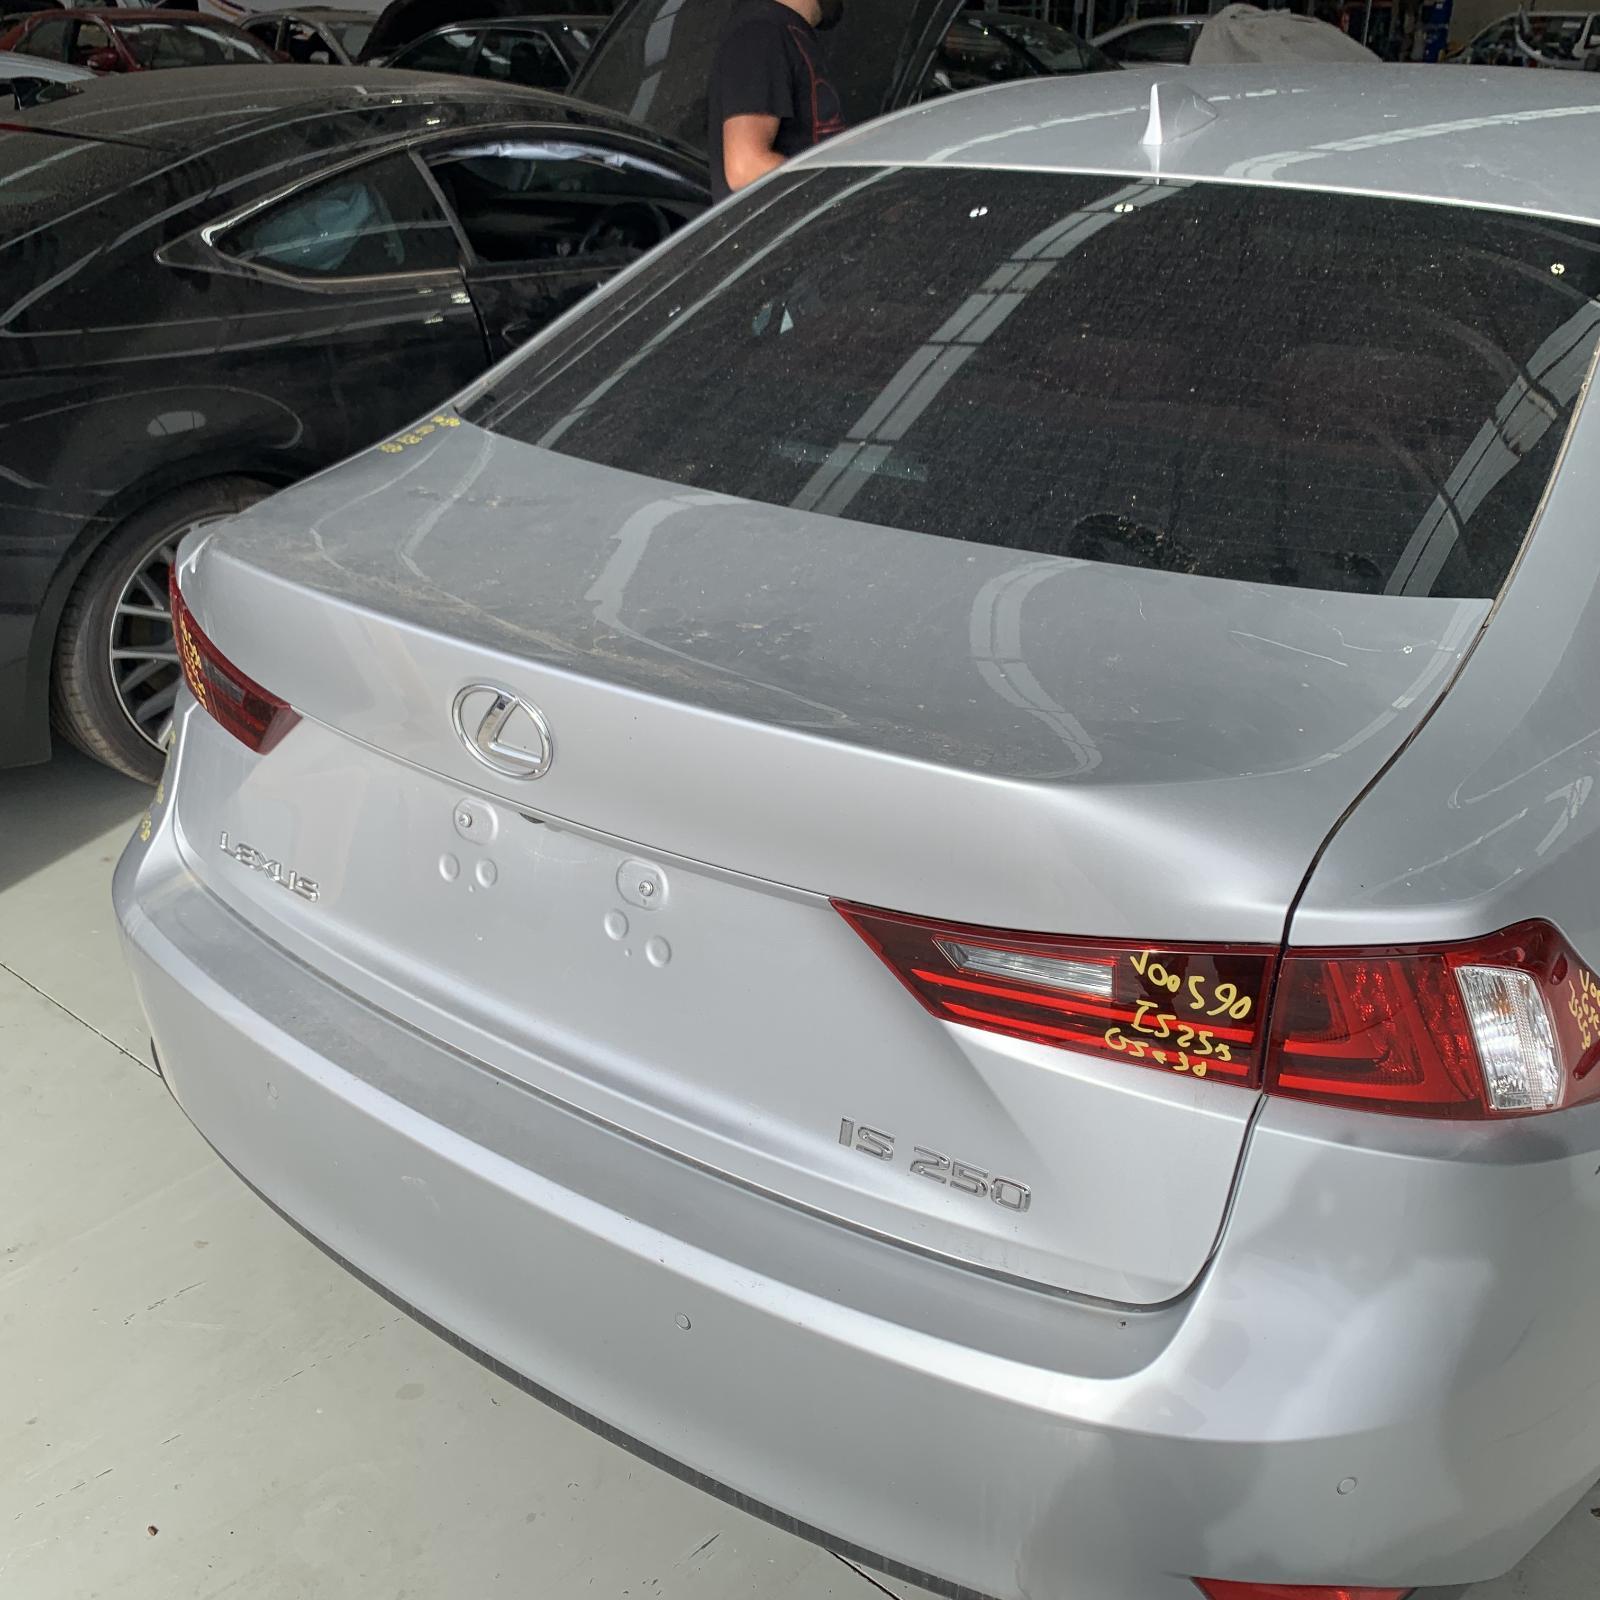 LEXUS IS SERIES, Bootlid/Tailgate, BOOTLID, XE30, IS200t/IS250/IS300h/IS350, 04/13-